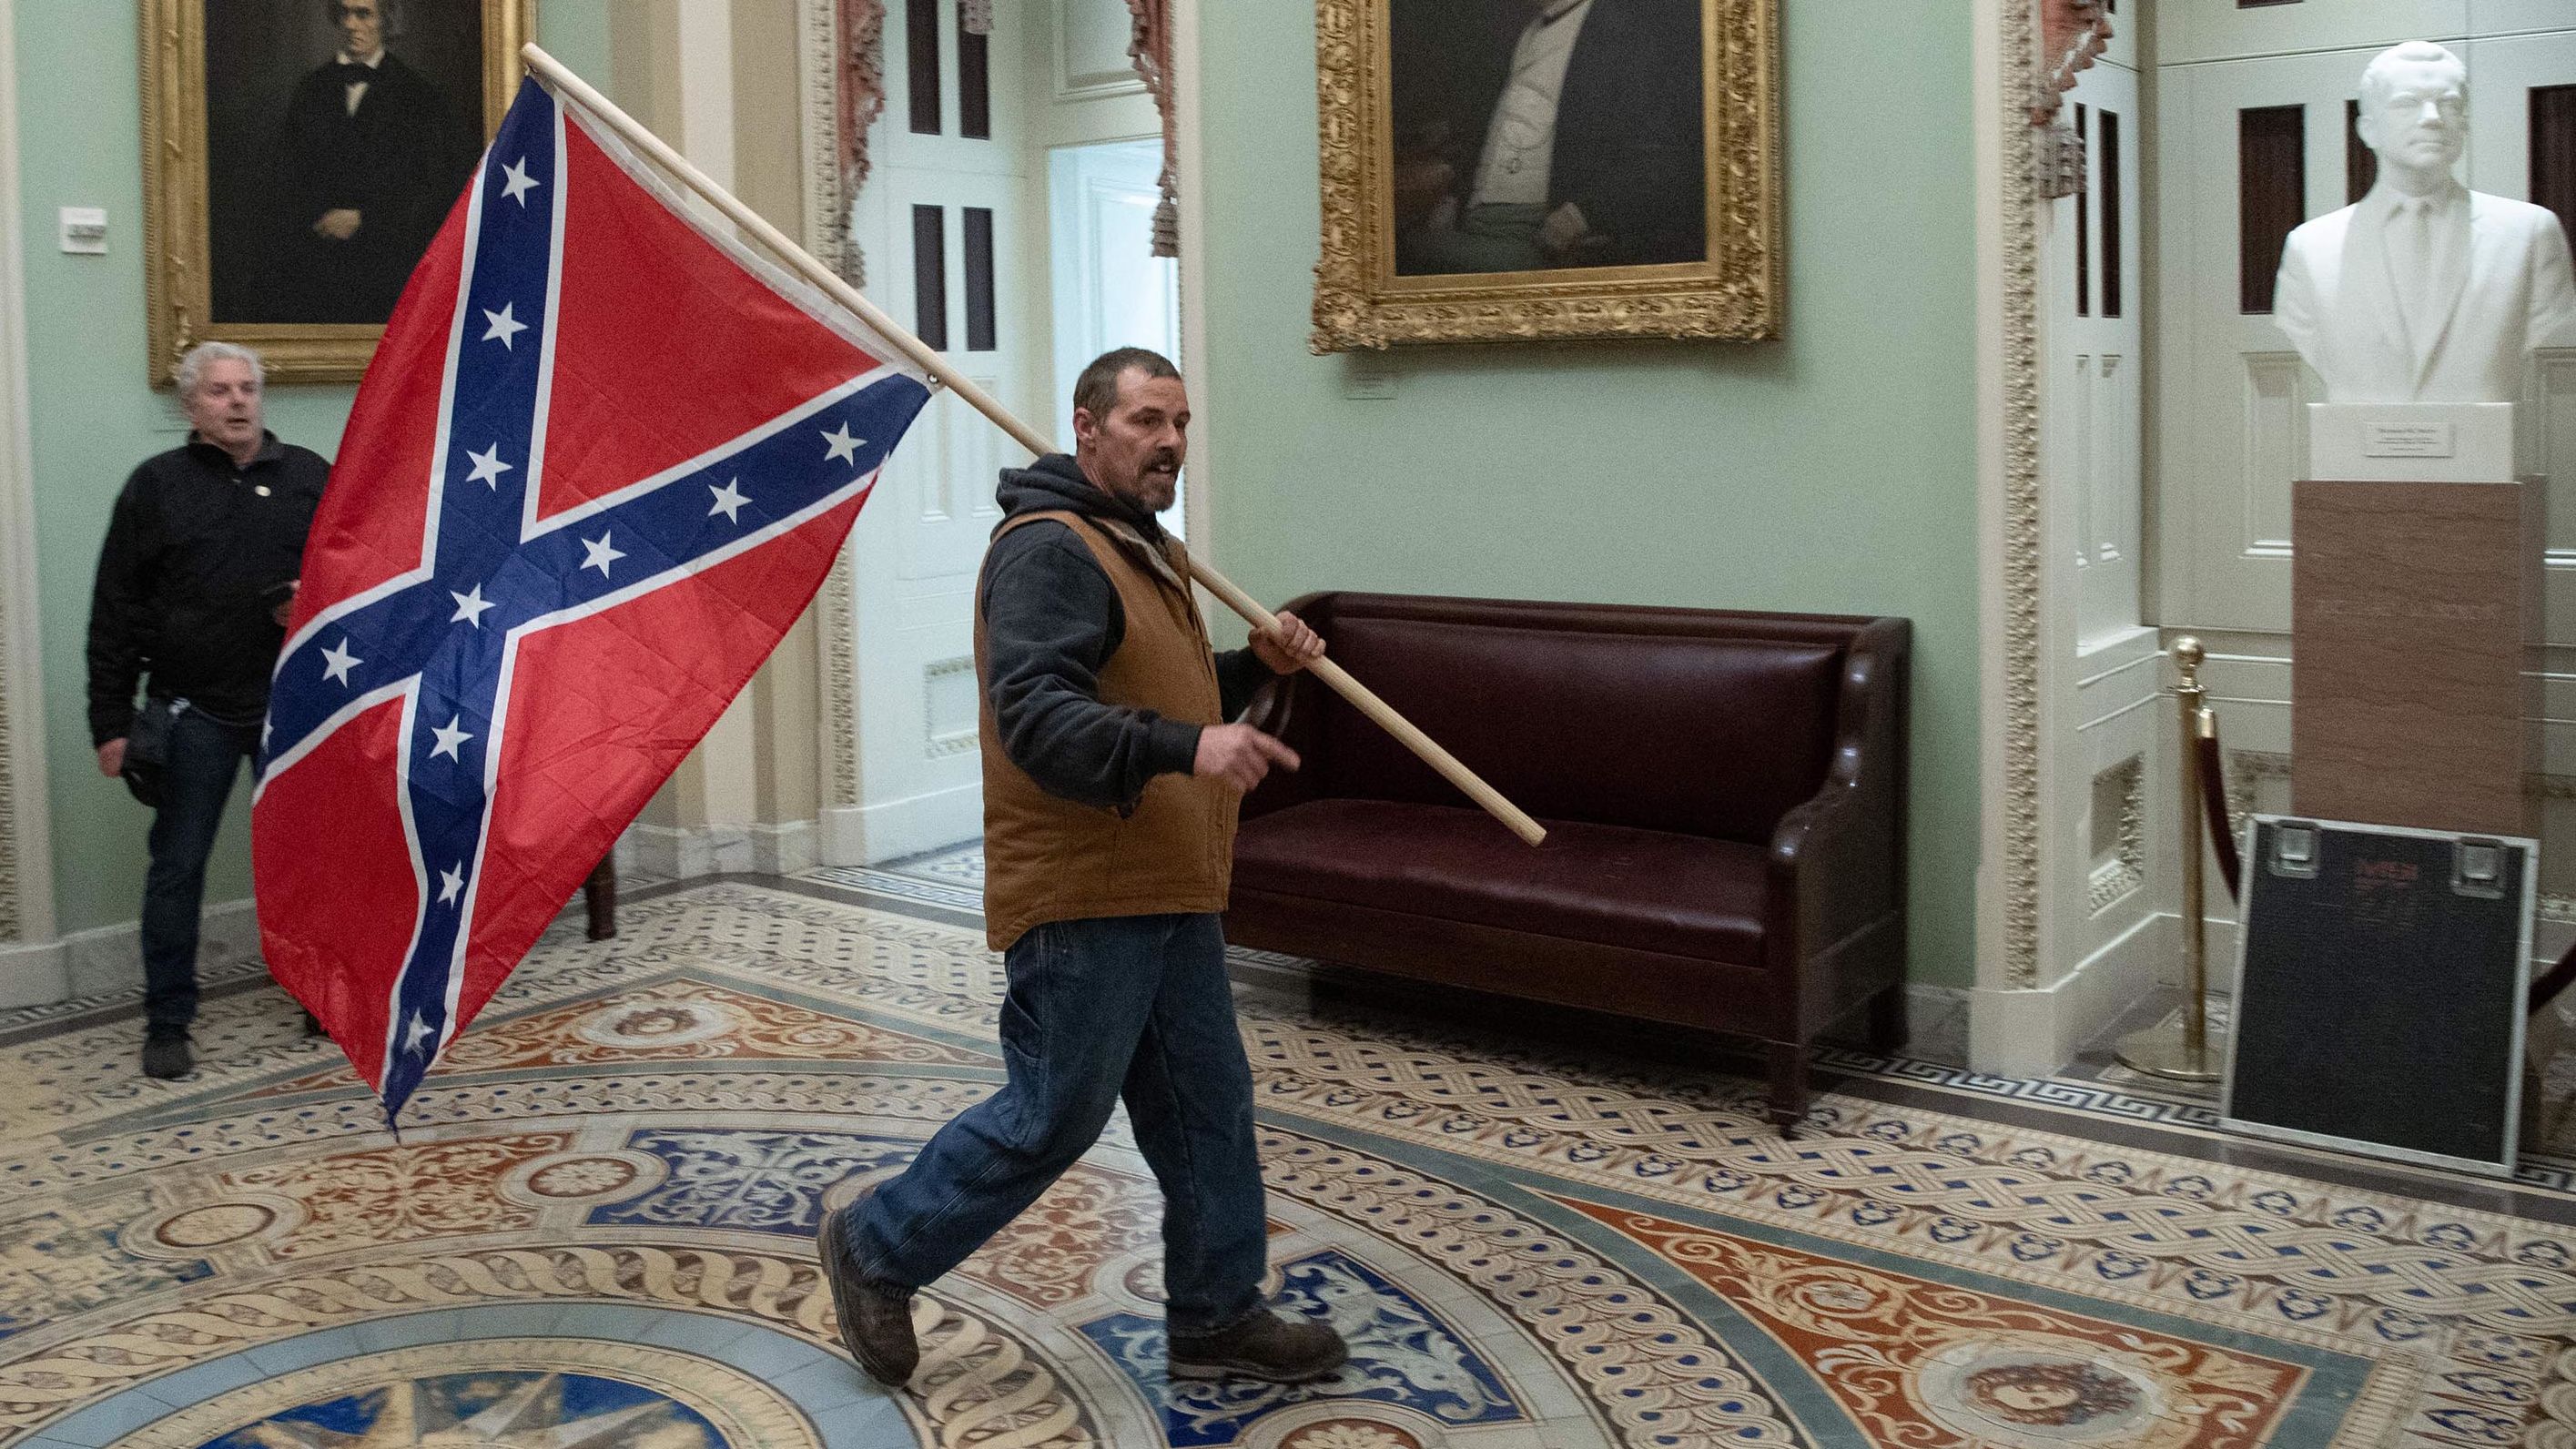 A Trump supporter <a href="https://www.cnn.com/2021/01/07/us/capitol-confederate-flag-fort-stevens/index.html" target="_blank">carries a Confederate battle flag</a> in the Capitol Rotunda after rioters breached the building. During the Civil War, the closest any insurgent carrying a Confederate flag ever came to the Capitol was about 6 miles, during the Battle of Fort Stevens in 1864.